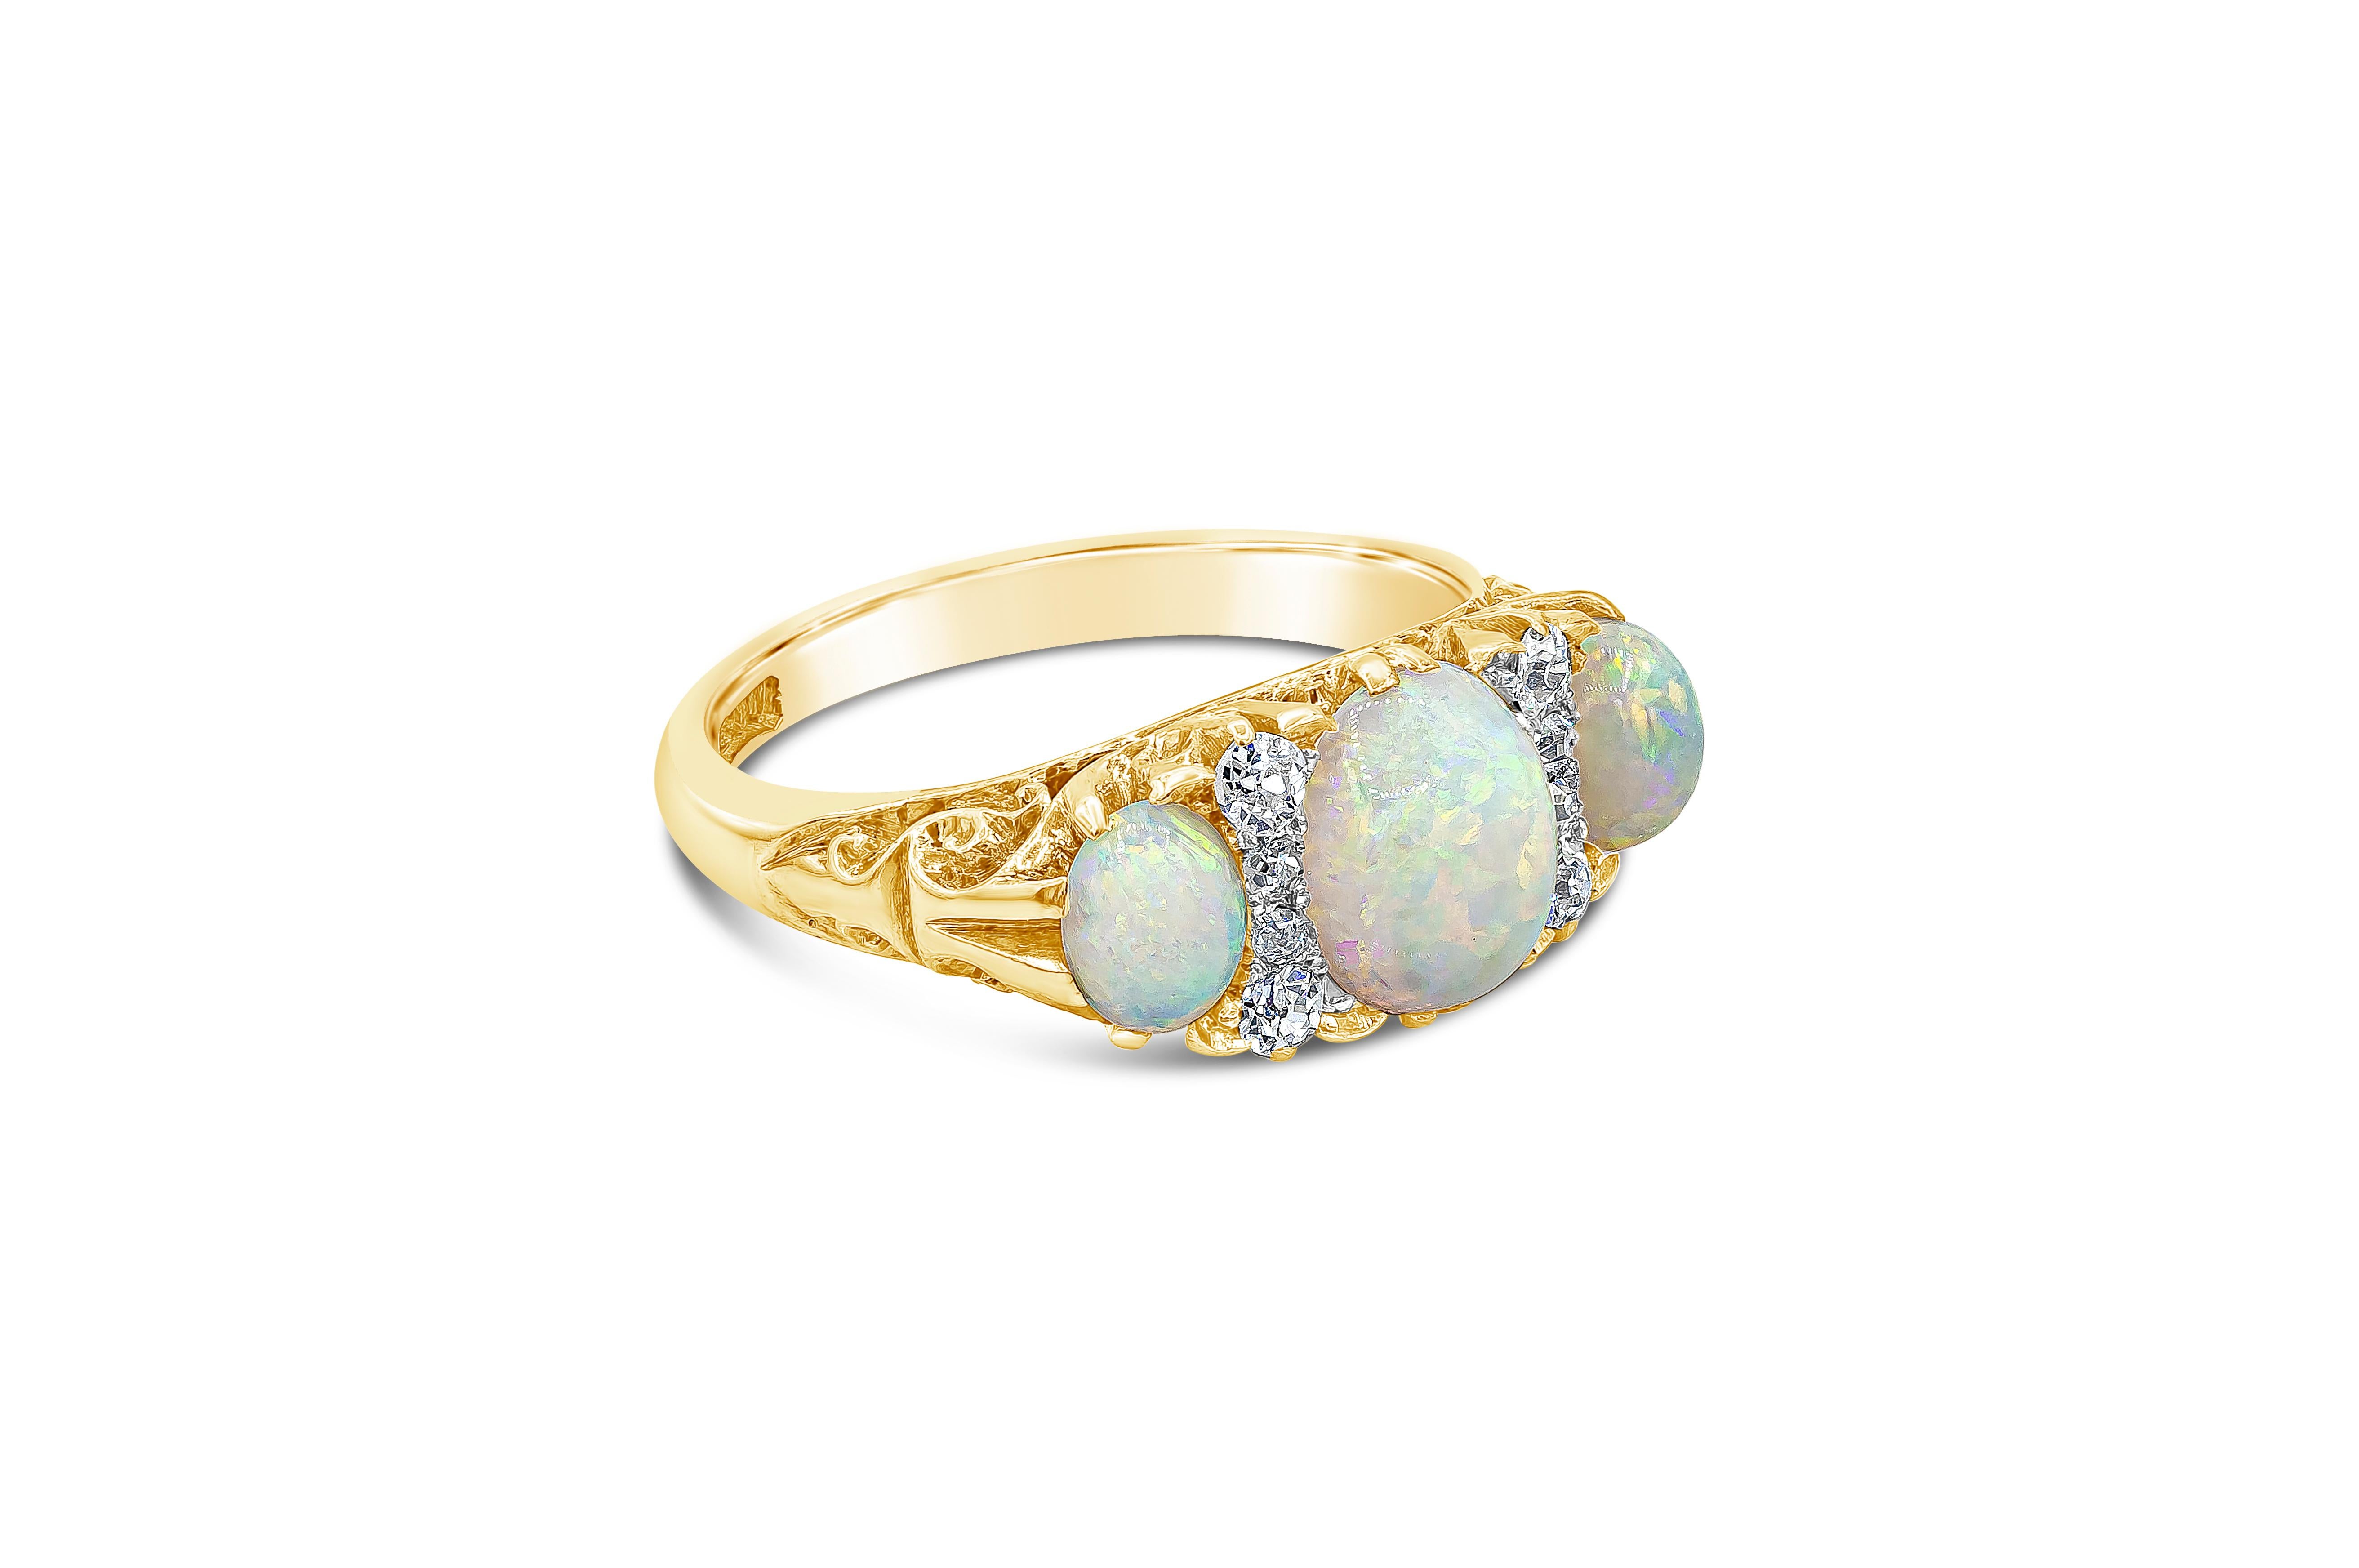 An antique three-stone ring from the Victorian era showcasing three beautiful oval opals spaced by a row of old mine diamonds. Diamonds set in 18k yellow gold finished with hand-carved design. Opal weighs approximately 2.00 carats total; diamonds